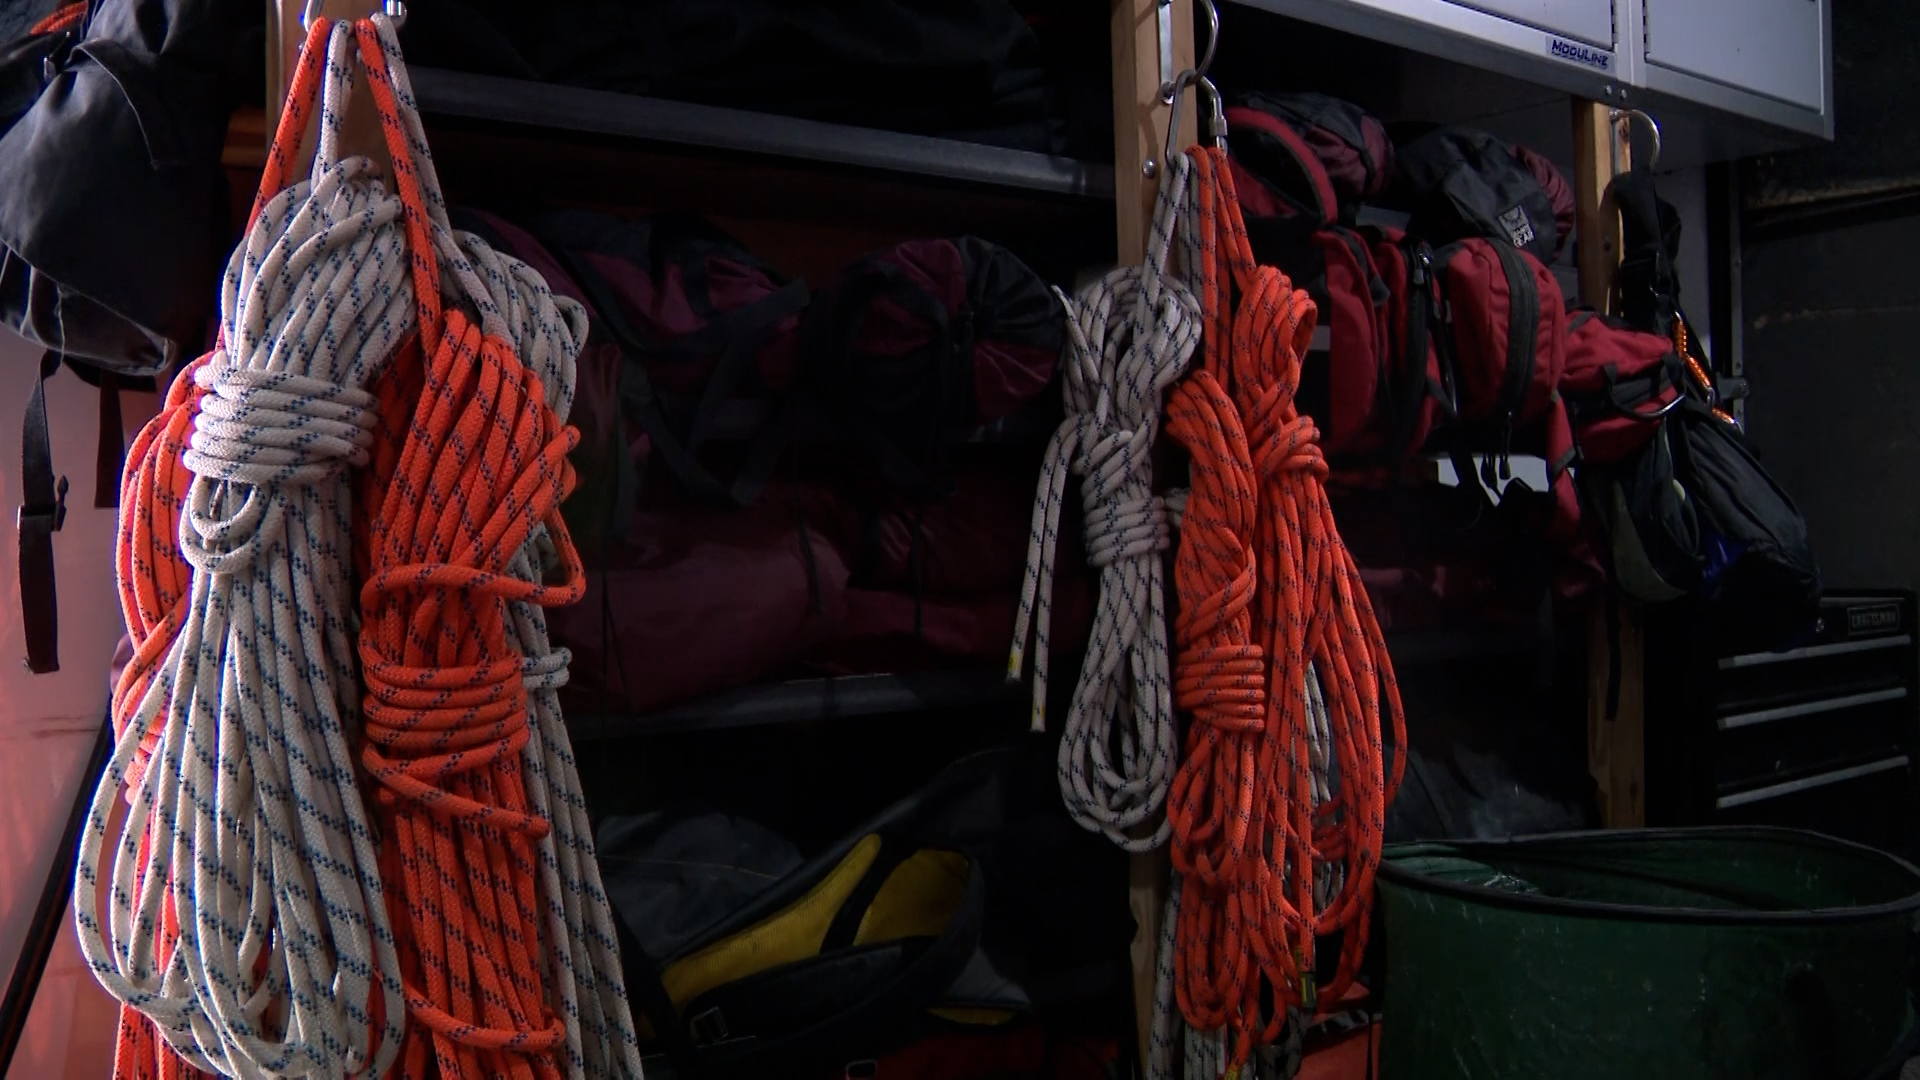 Search and rescue gear used by Salt Lake County Search and Rescue as crews prepare for the holiday ...